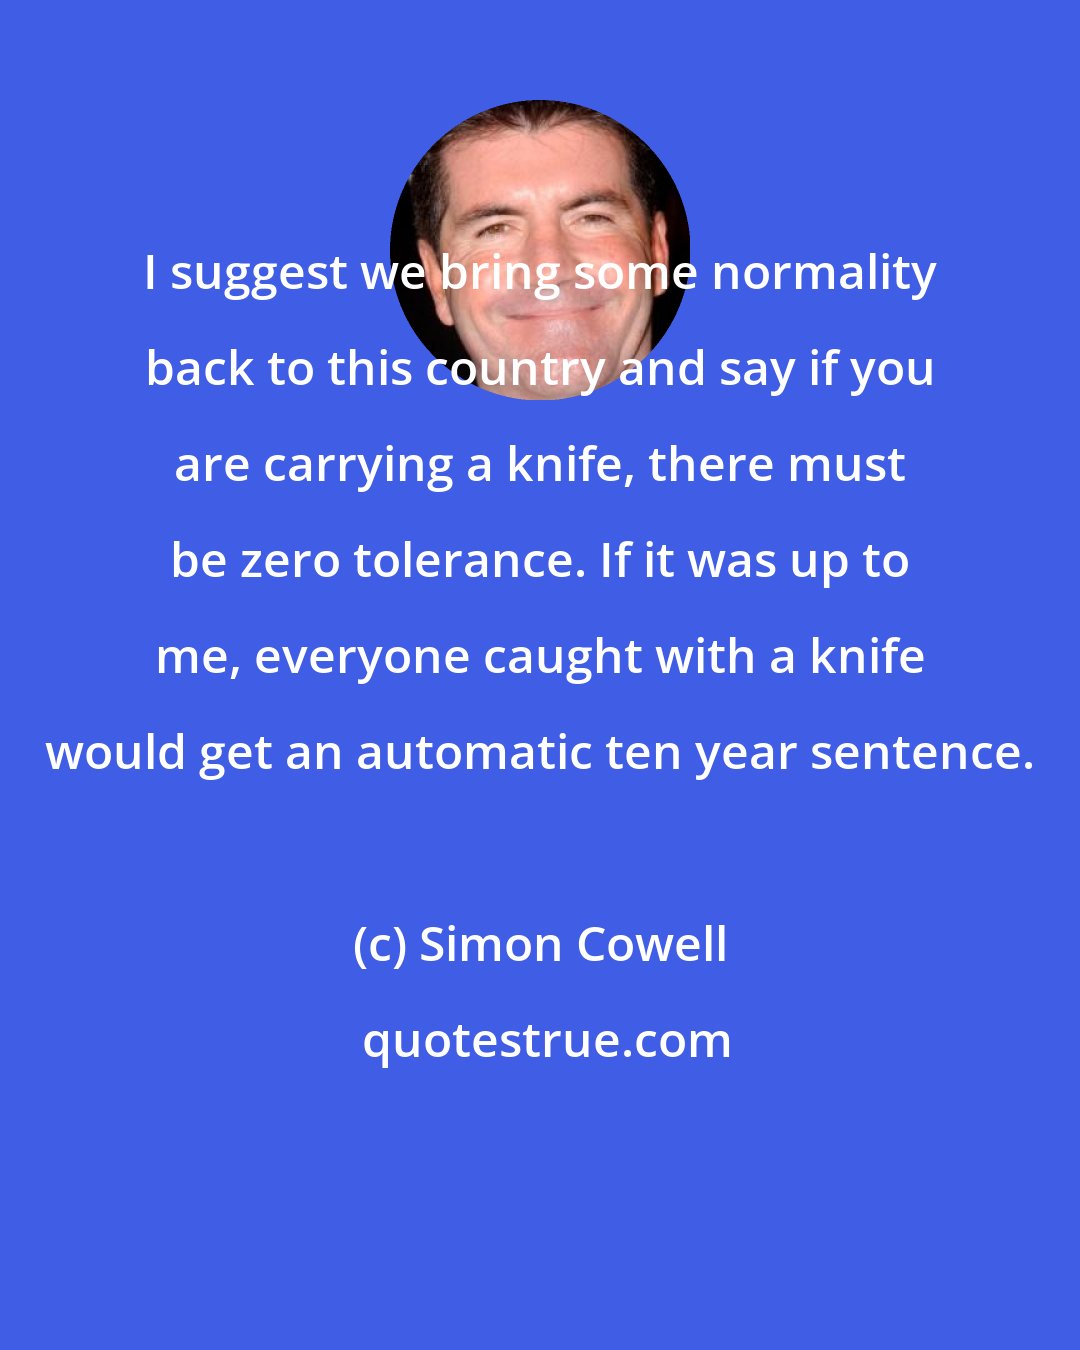 Simon Cowell: I suggest we bring some normality back to this country and say if you are carrying a knife, there must be zero tolerance. If it was up to me, everyone caught with a knife would get an automatic ten year sentence.